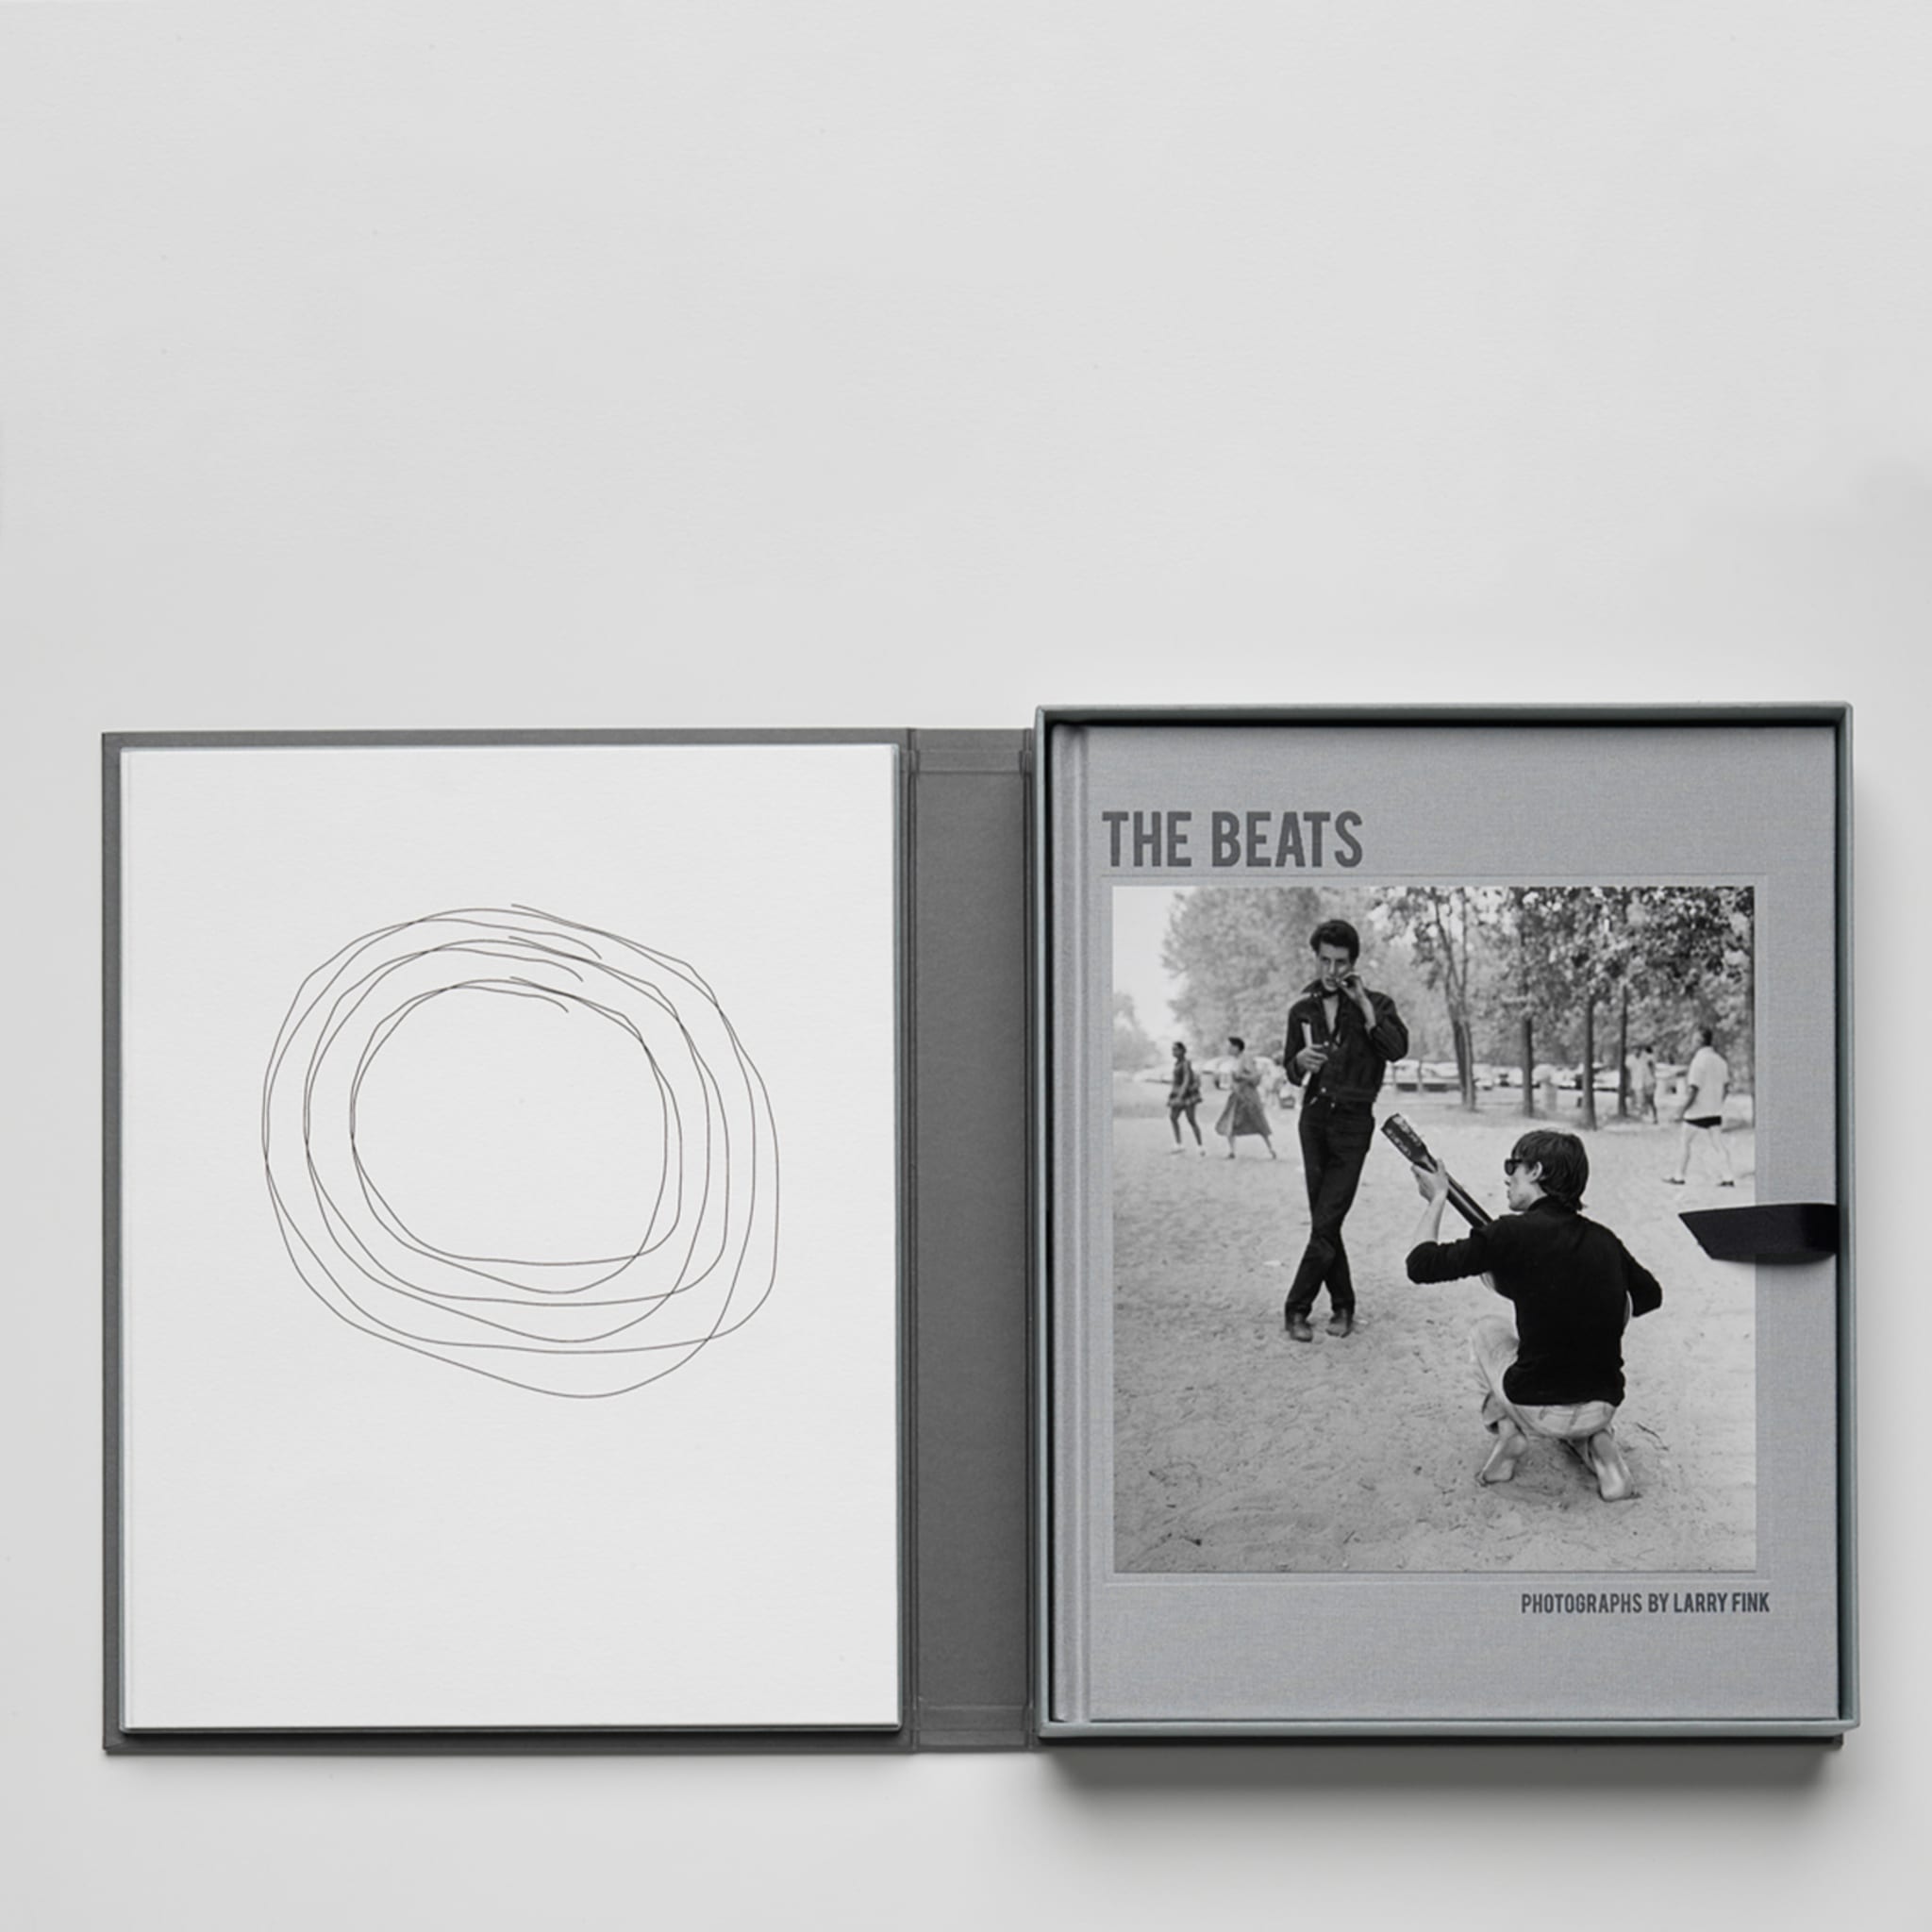  The Beats - Limited Edition Box Set #1 – Larry Fink - Limited Edition of 25 copies - Alternative view 3